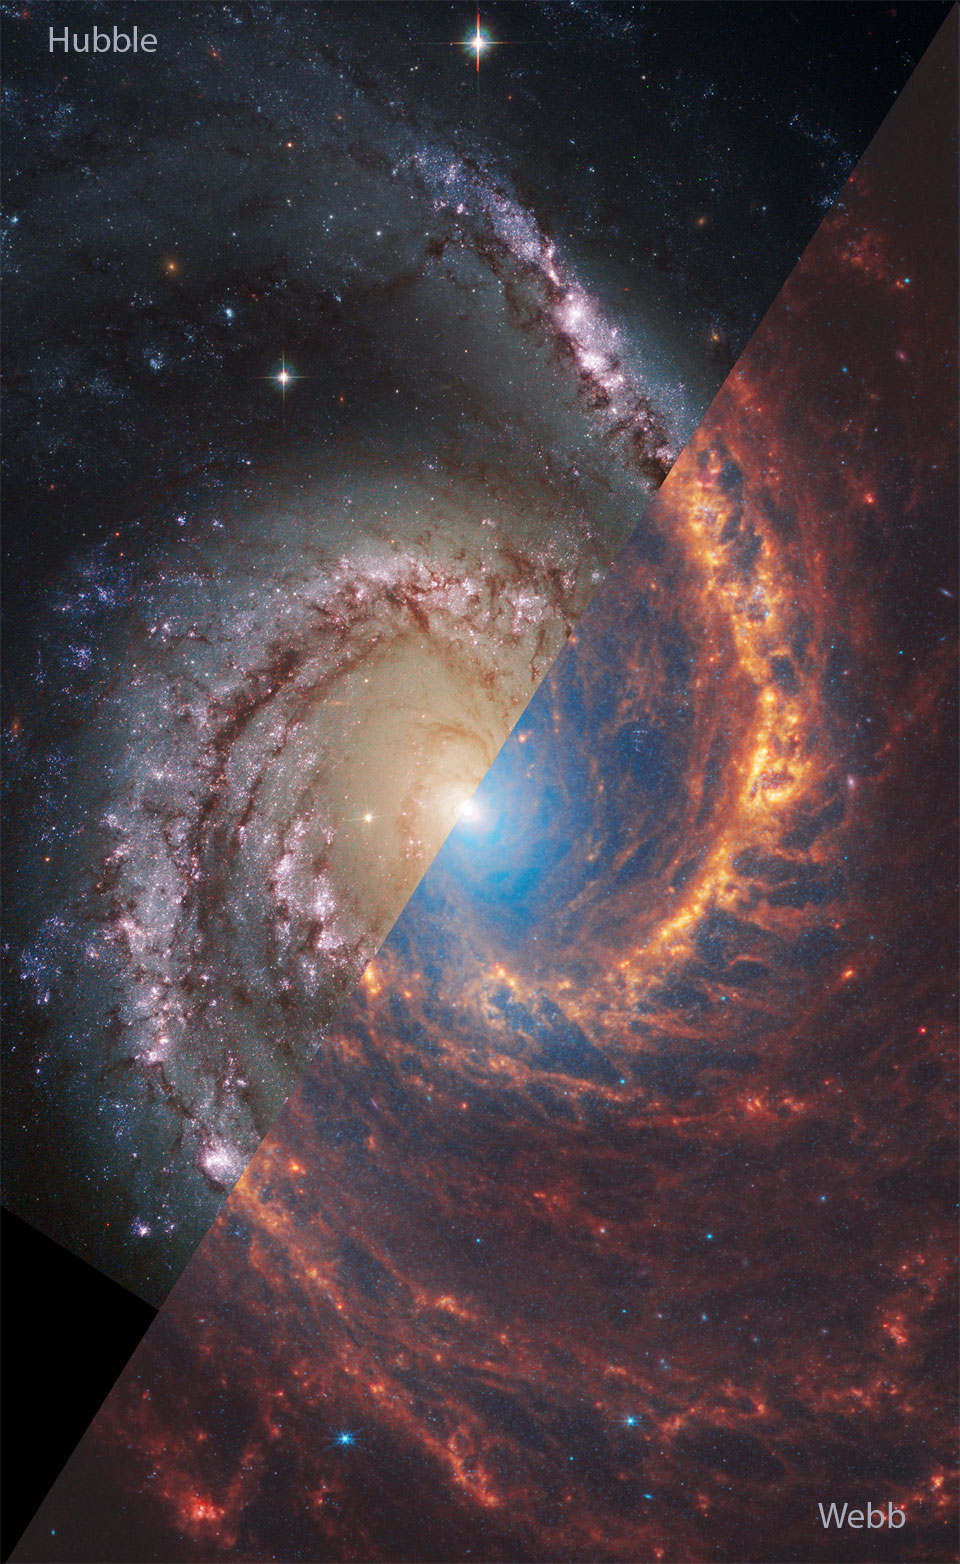 Spiral galaxy NGC 1566 is shown with an image from Hubble
primarily in visible light on the upper left, and an image from
Webb in primarily infrared light on the lower right. A rollover
image shows the same galaxy with the Webb and Hubble parts
reversed.
Please see the explanation for more detailed information.